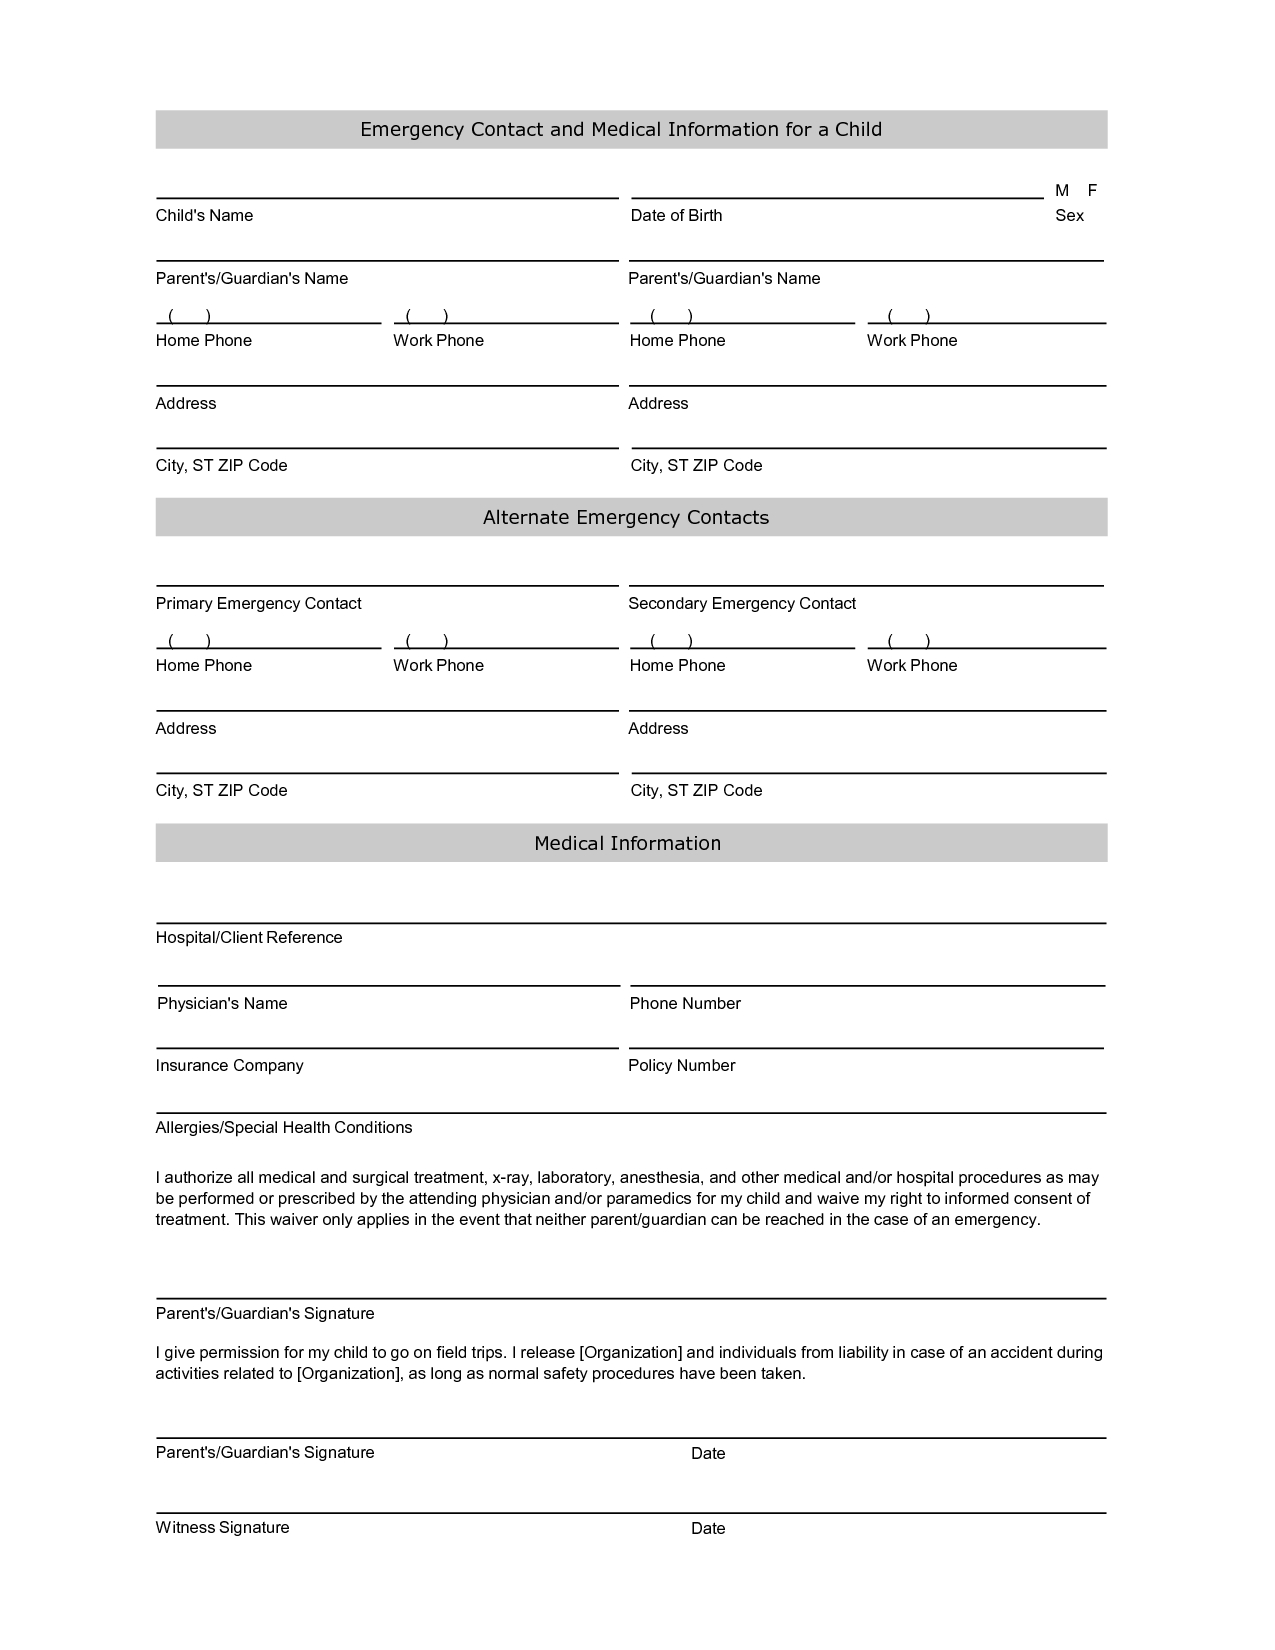 Emergency Contact Information Form Template  Printables  Daycare within Student Information Card Template